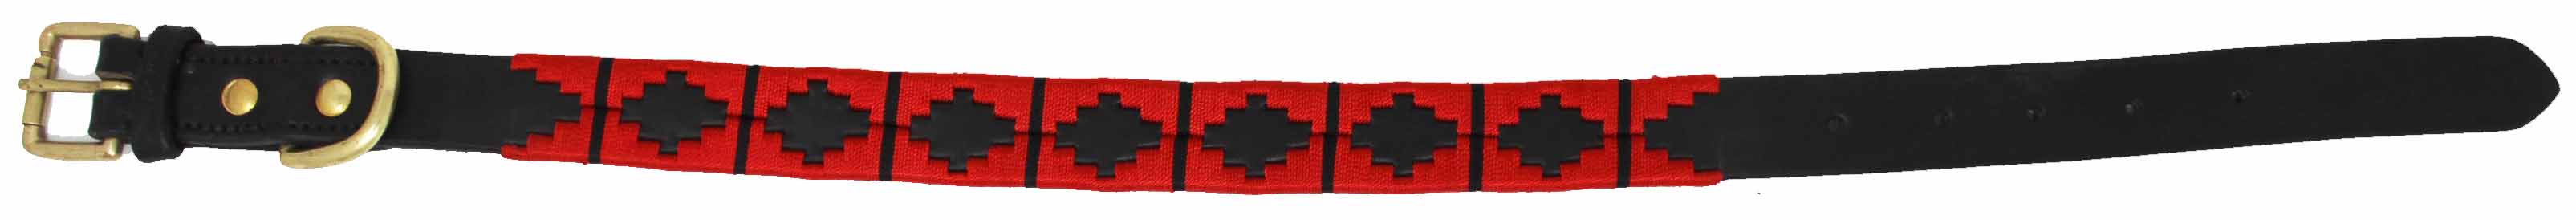 Leather Argentine Polo Embroidered Dog Collar D-Ring 60FH08